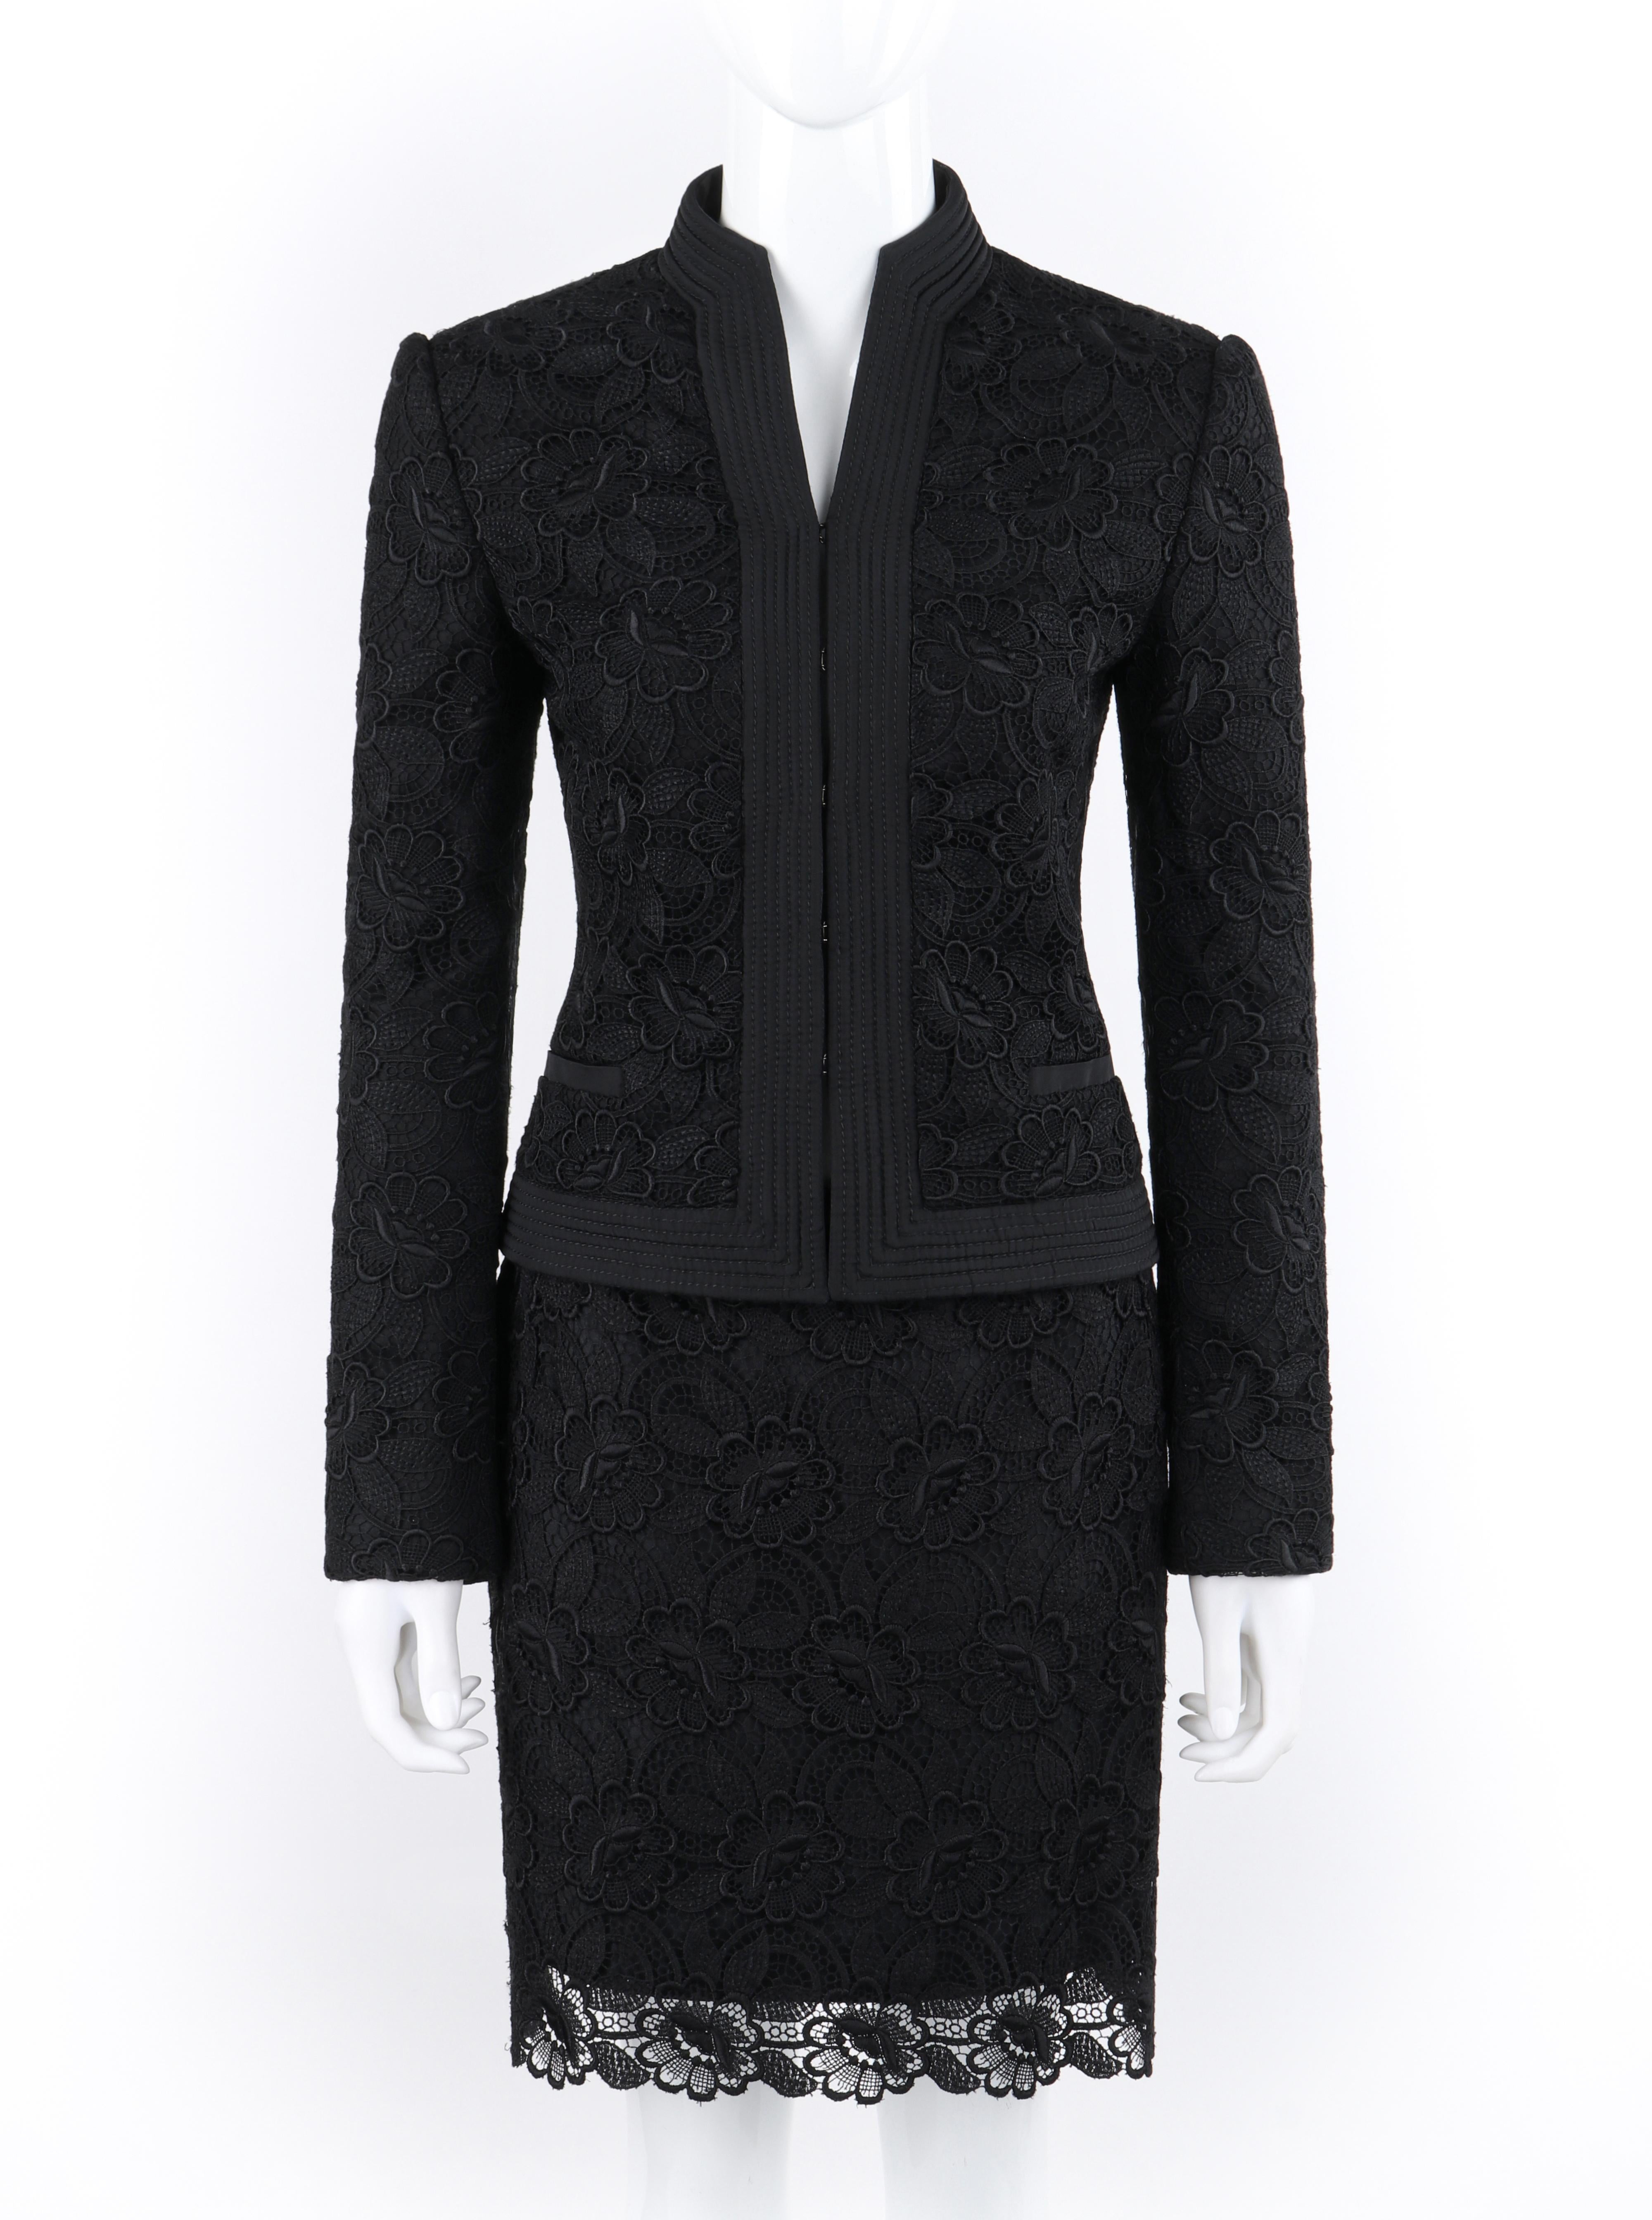 ALEXANDER McQUEEN Pre-Fall 2006 Black Two Piece Lace Jacket Skirt Suit Set

Brand / Manufacturer: Alexander McQueen
Collection: Pre Fall 2006
Designer: Alexander McQueen
Style: Jacket Skirt Suit Set
Color(s): Shades of black
Lined: Yes
Marked Fabric